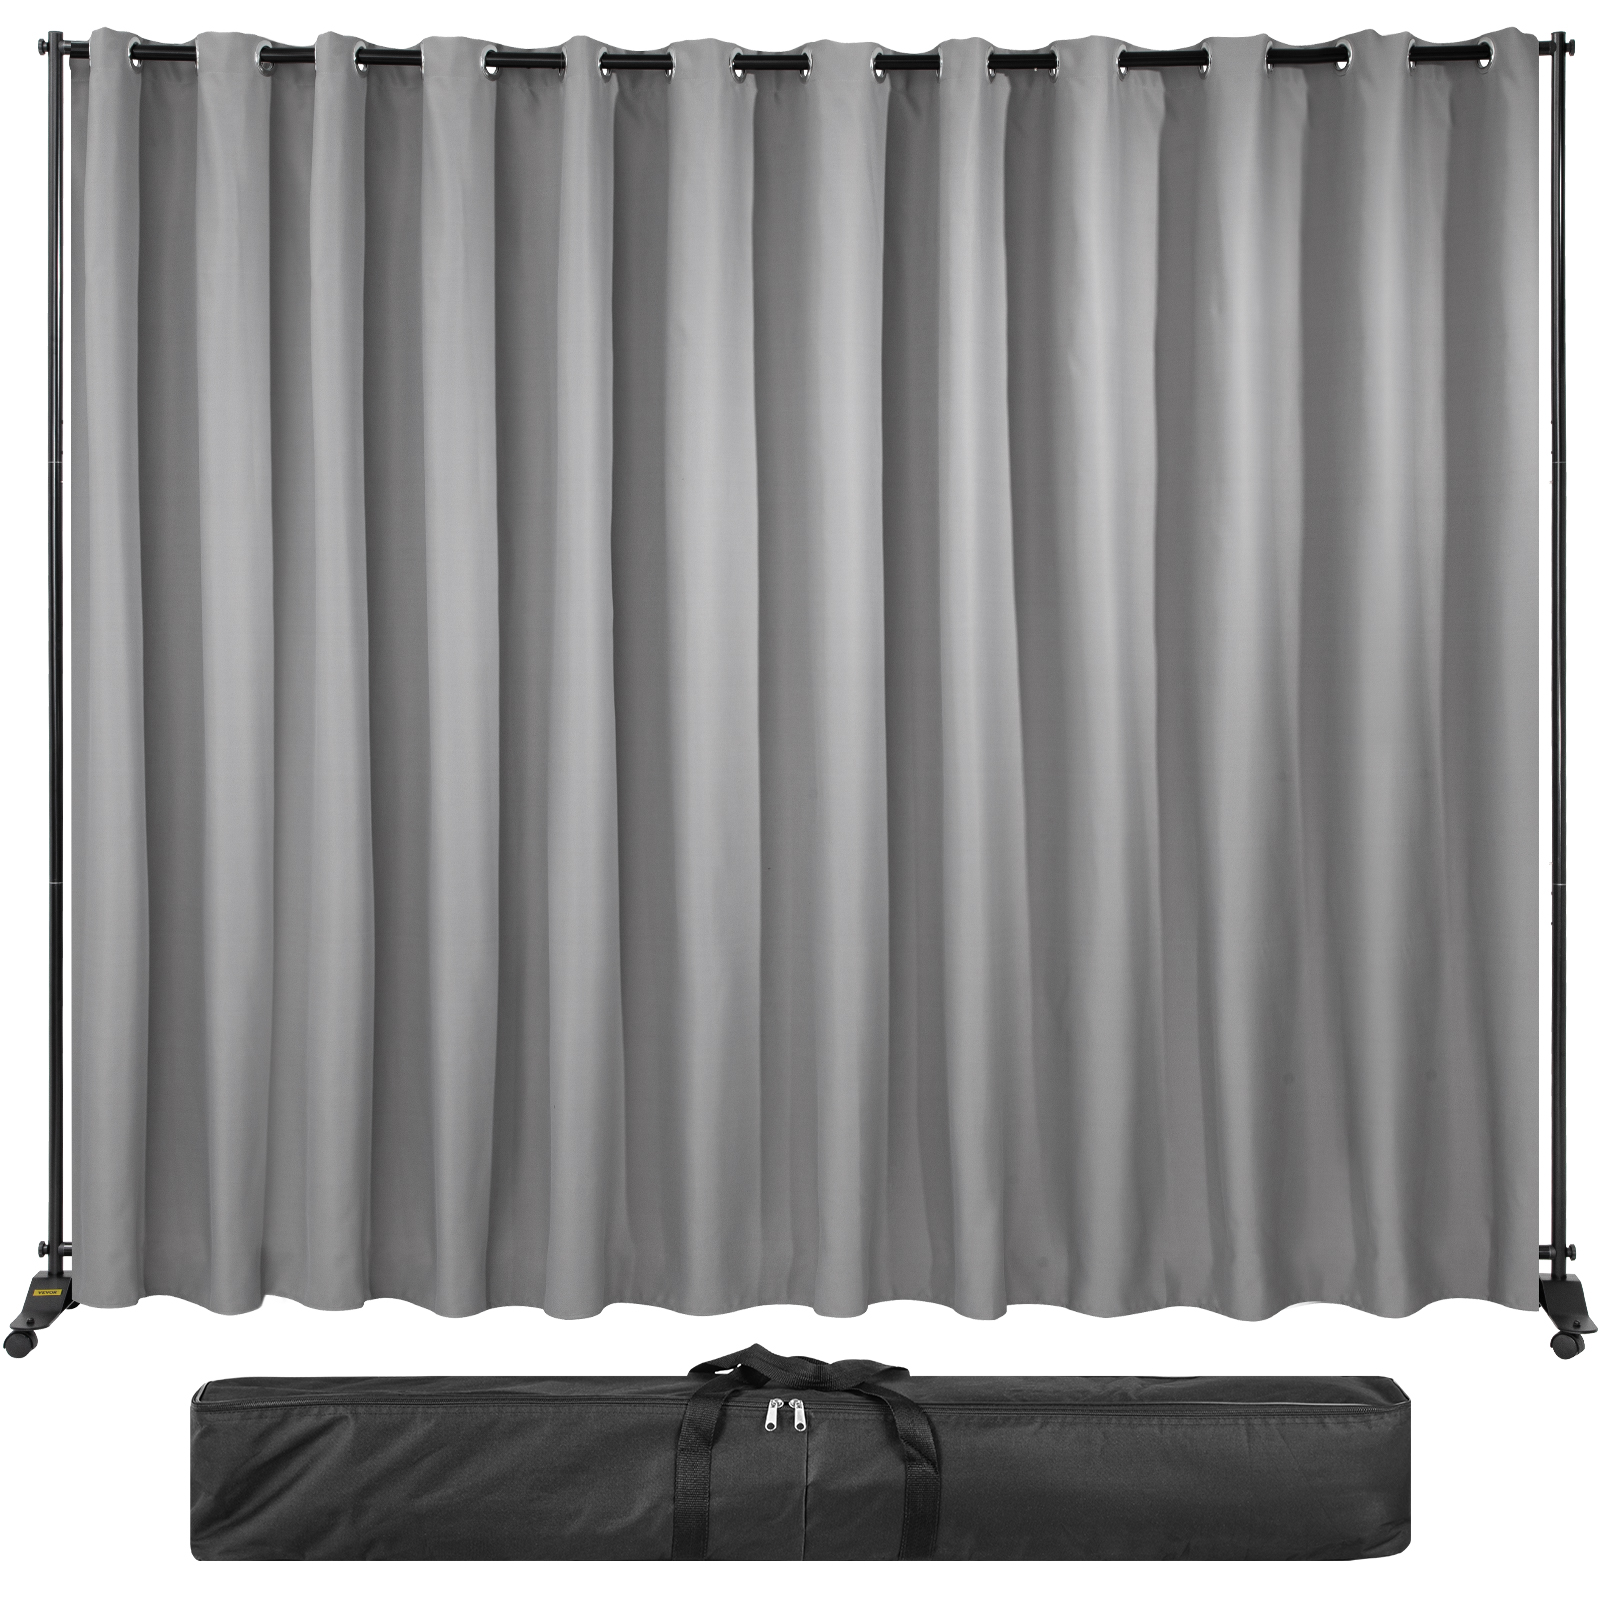 https://d2qc09rl1gfuof.cloudfront.net/product/PFWYSBDDWCTF2434A/curtain-divider-stand-m100-1.2.jpg